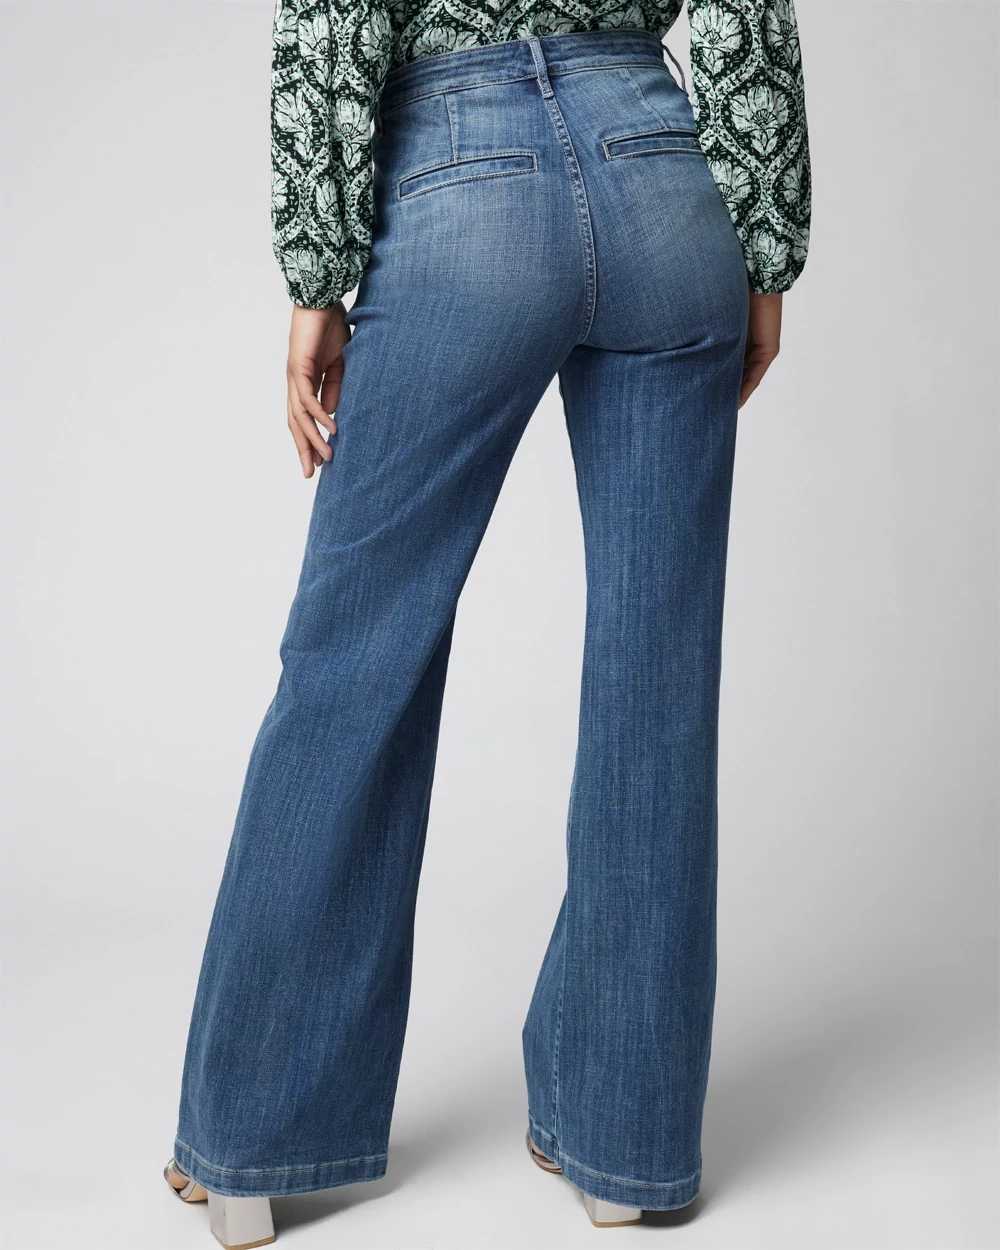 Extra High-Rise Everyday Soft Denim  Wide Leg Trouser Jeans click to view larger image.